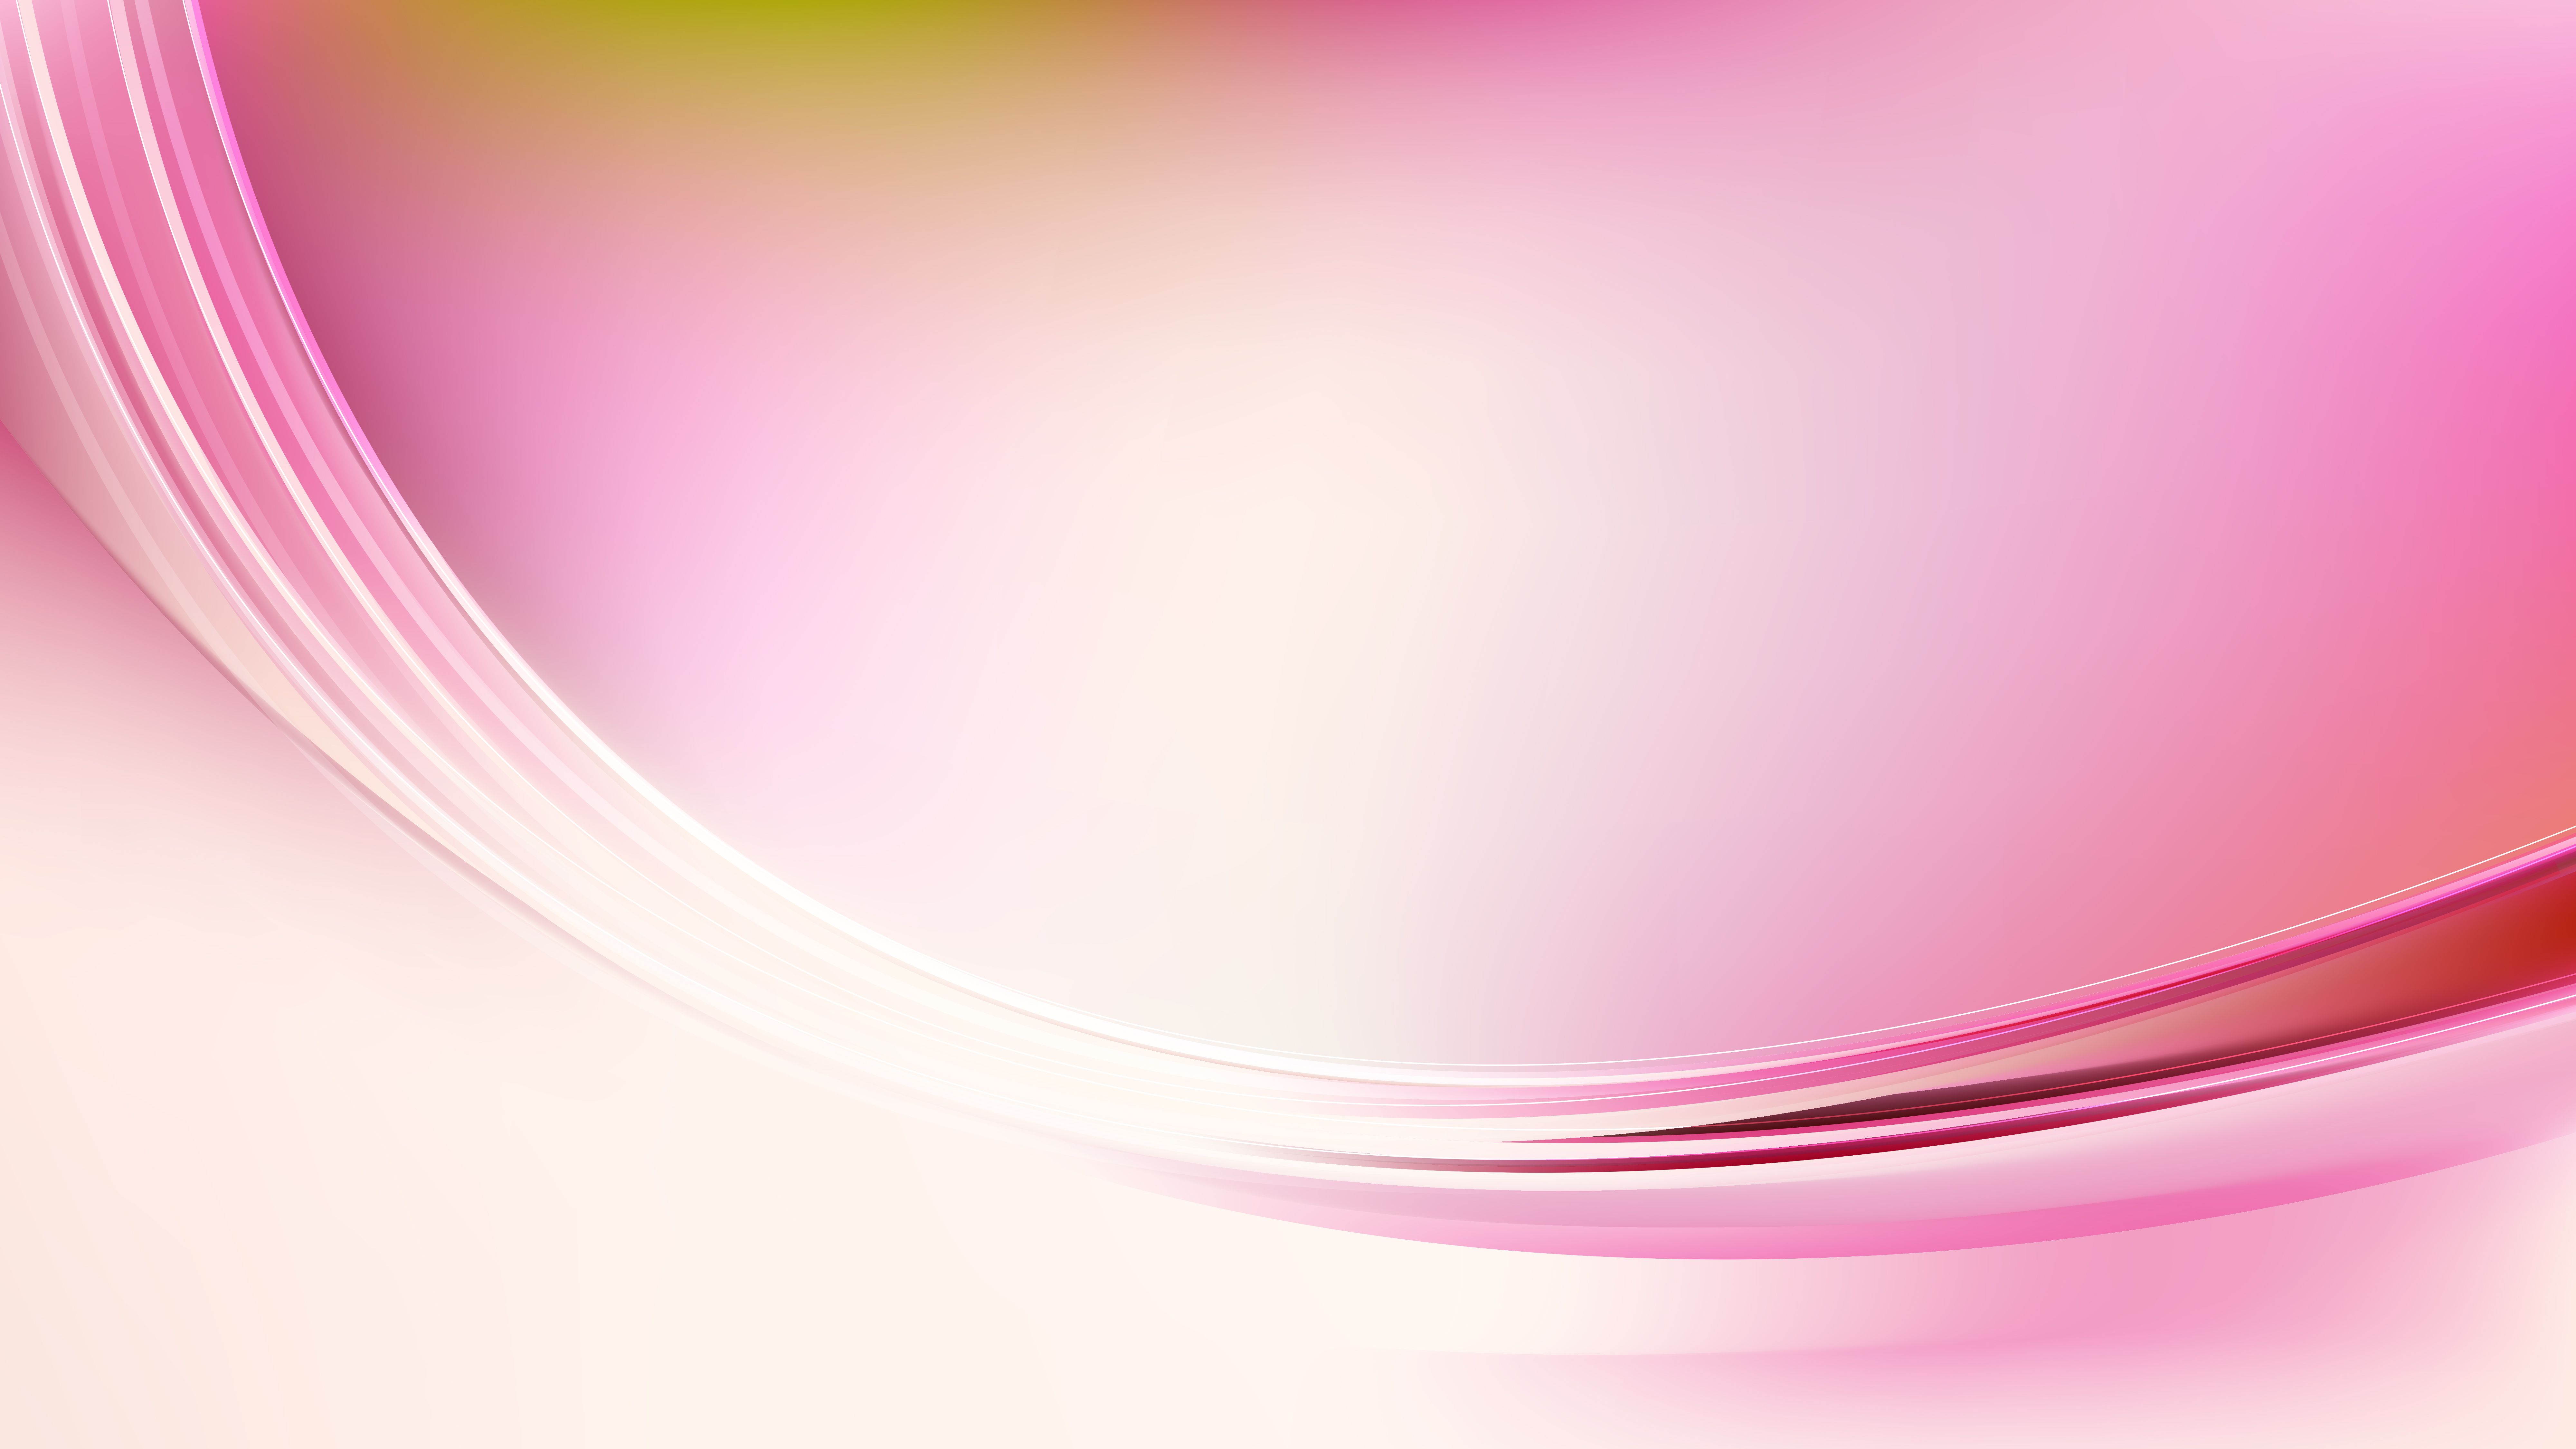 Free Pink and White Abstract Wavy Background